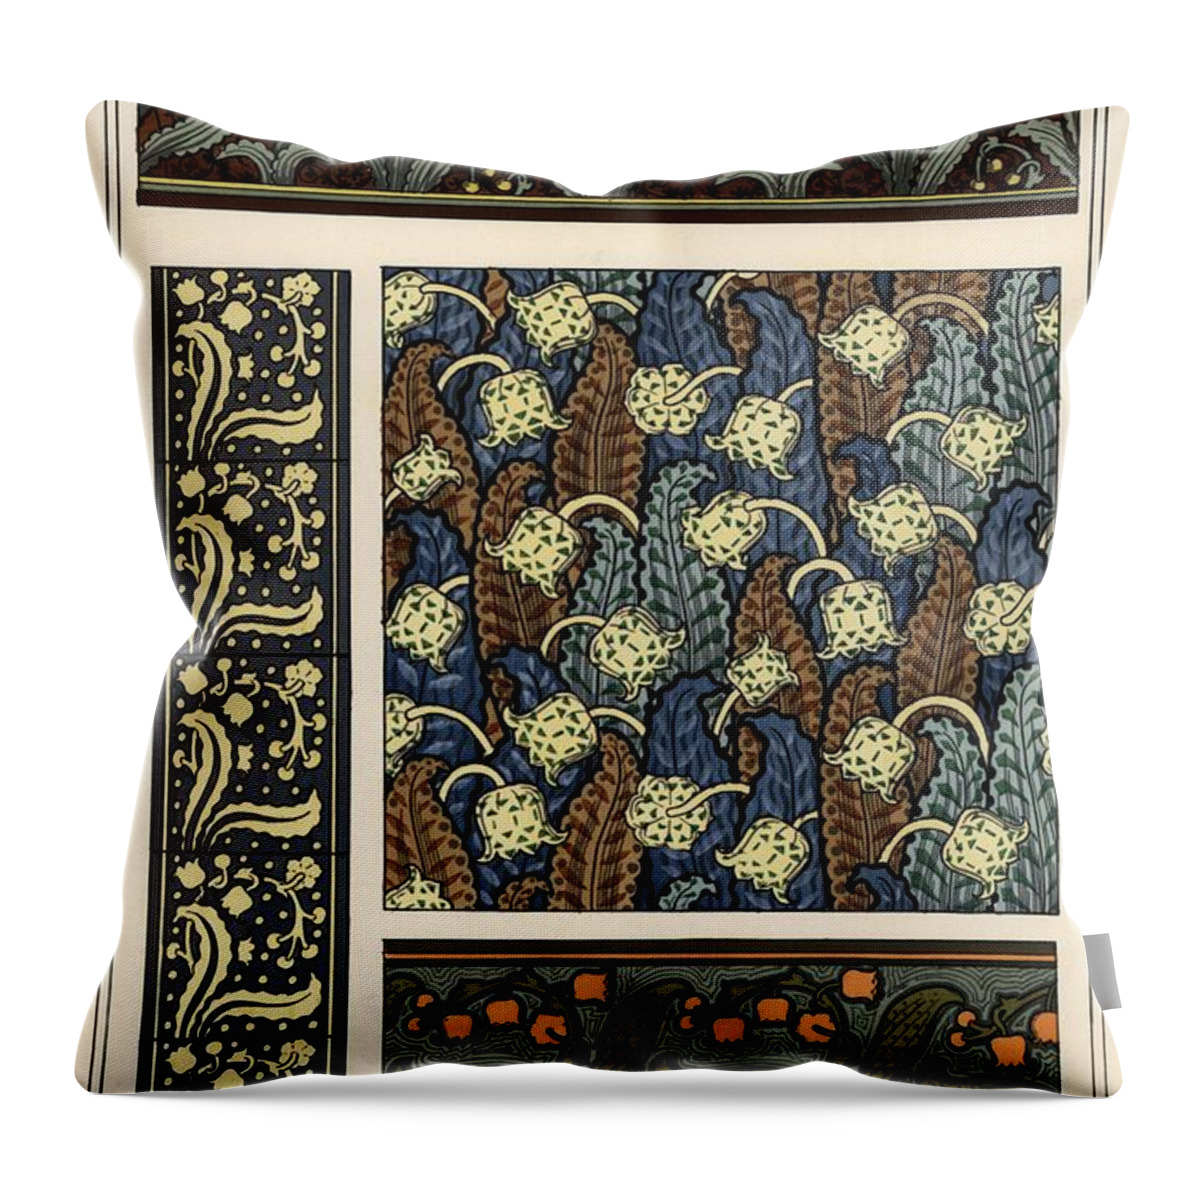 1897 Throw Pillow featuring the drawing Lily in patterns for borders, ceramic tiles and stained glass. Lithograph by A. Poidevin. by Album